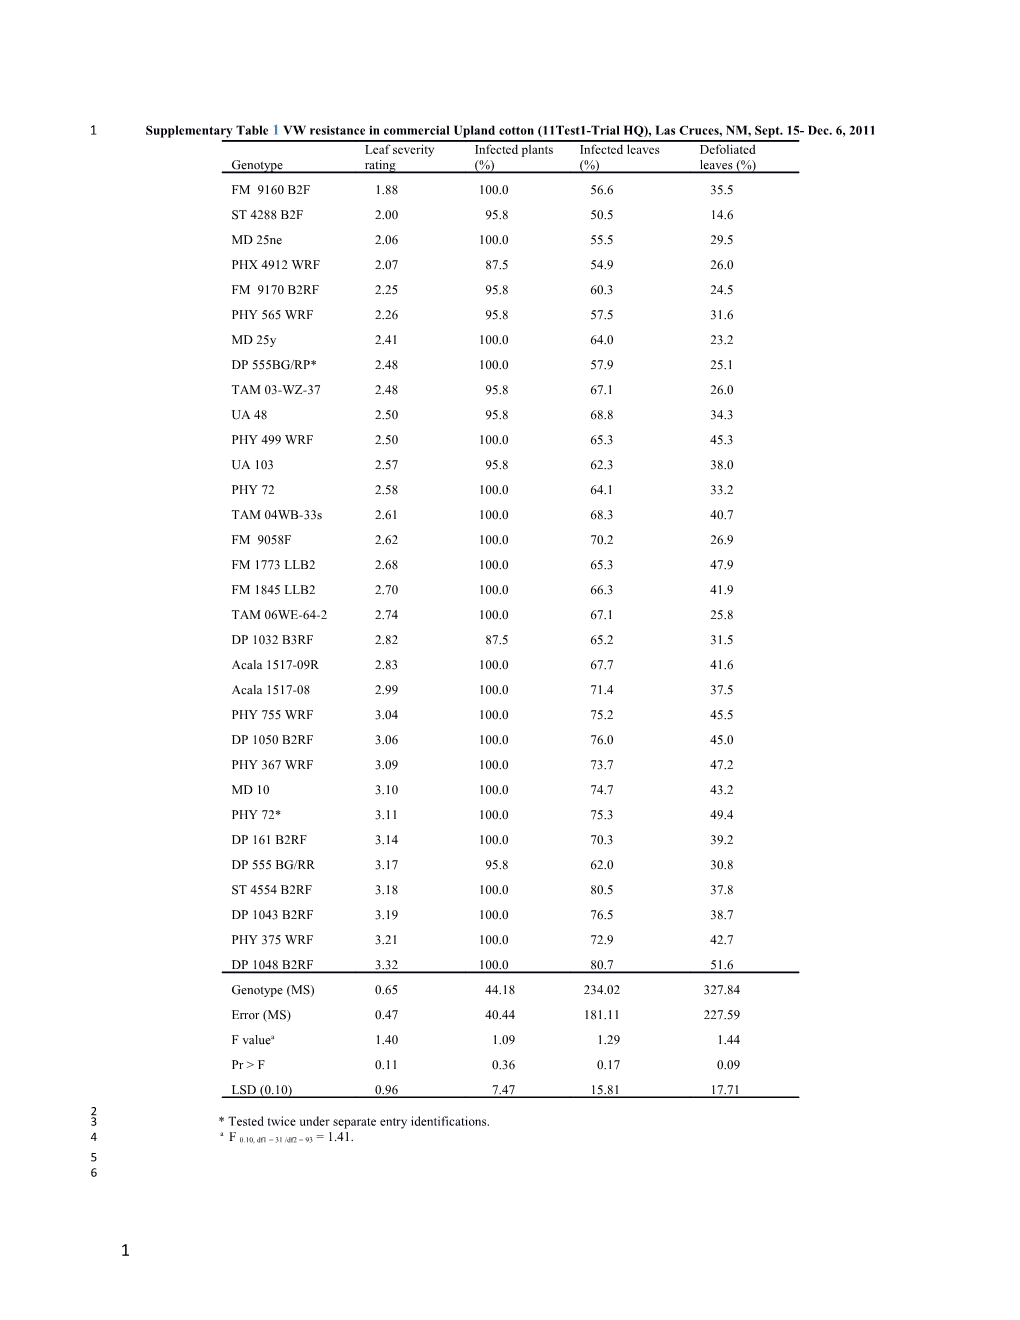 Supplementary Table 1VW Resistance in Commercial Upland Cotton (11Test1-Trial HQ), Las